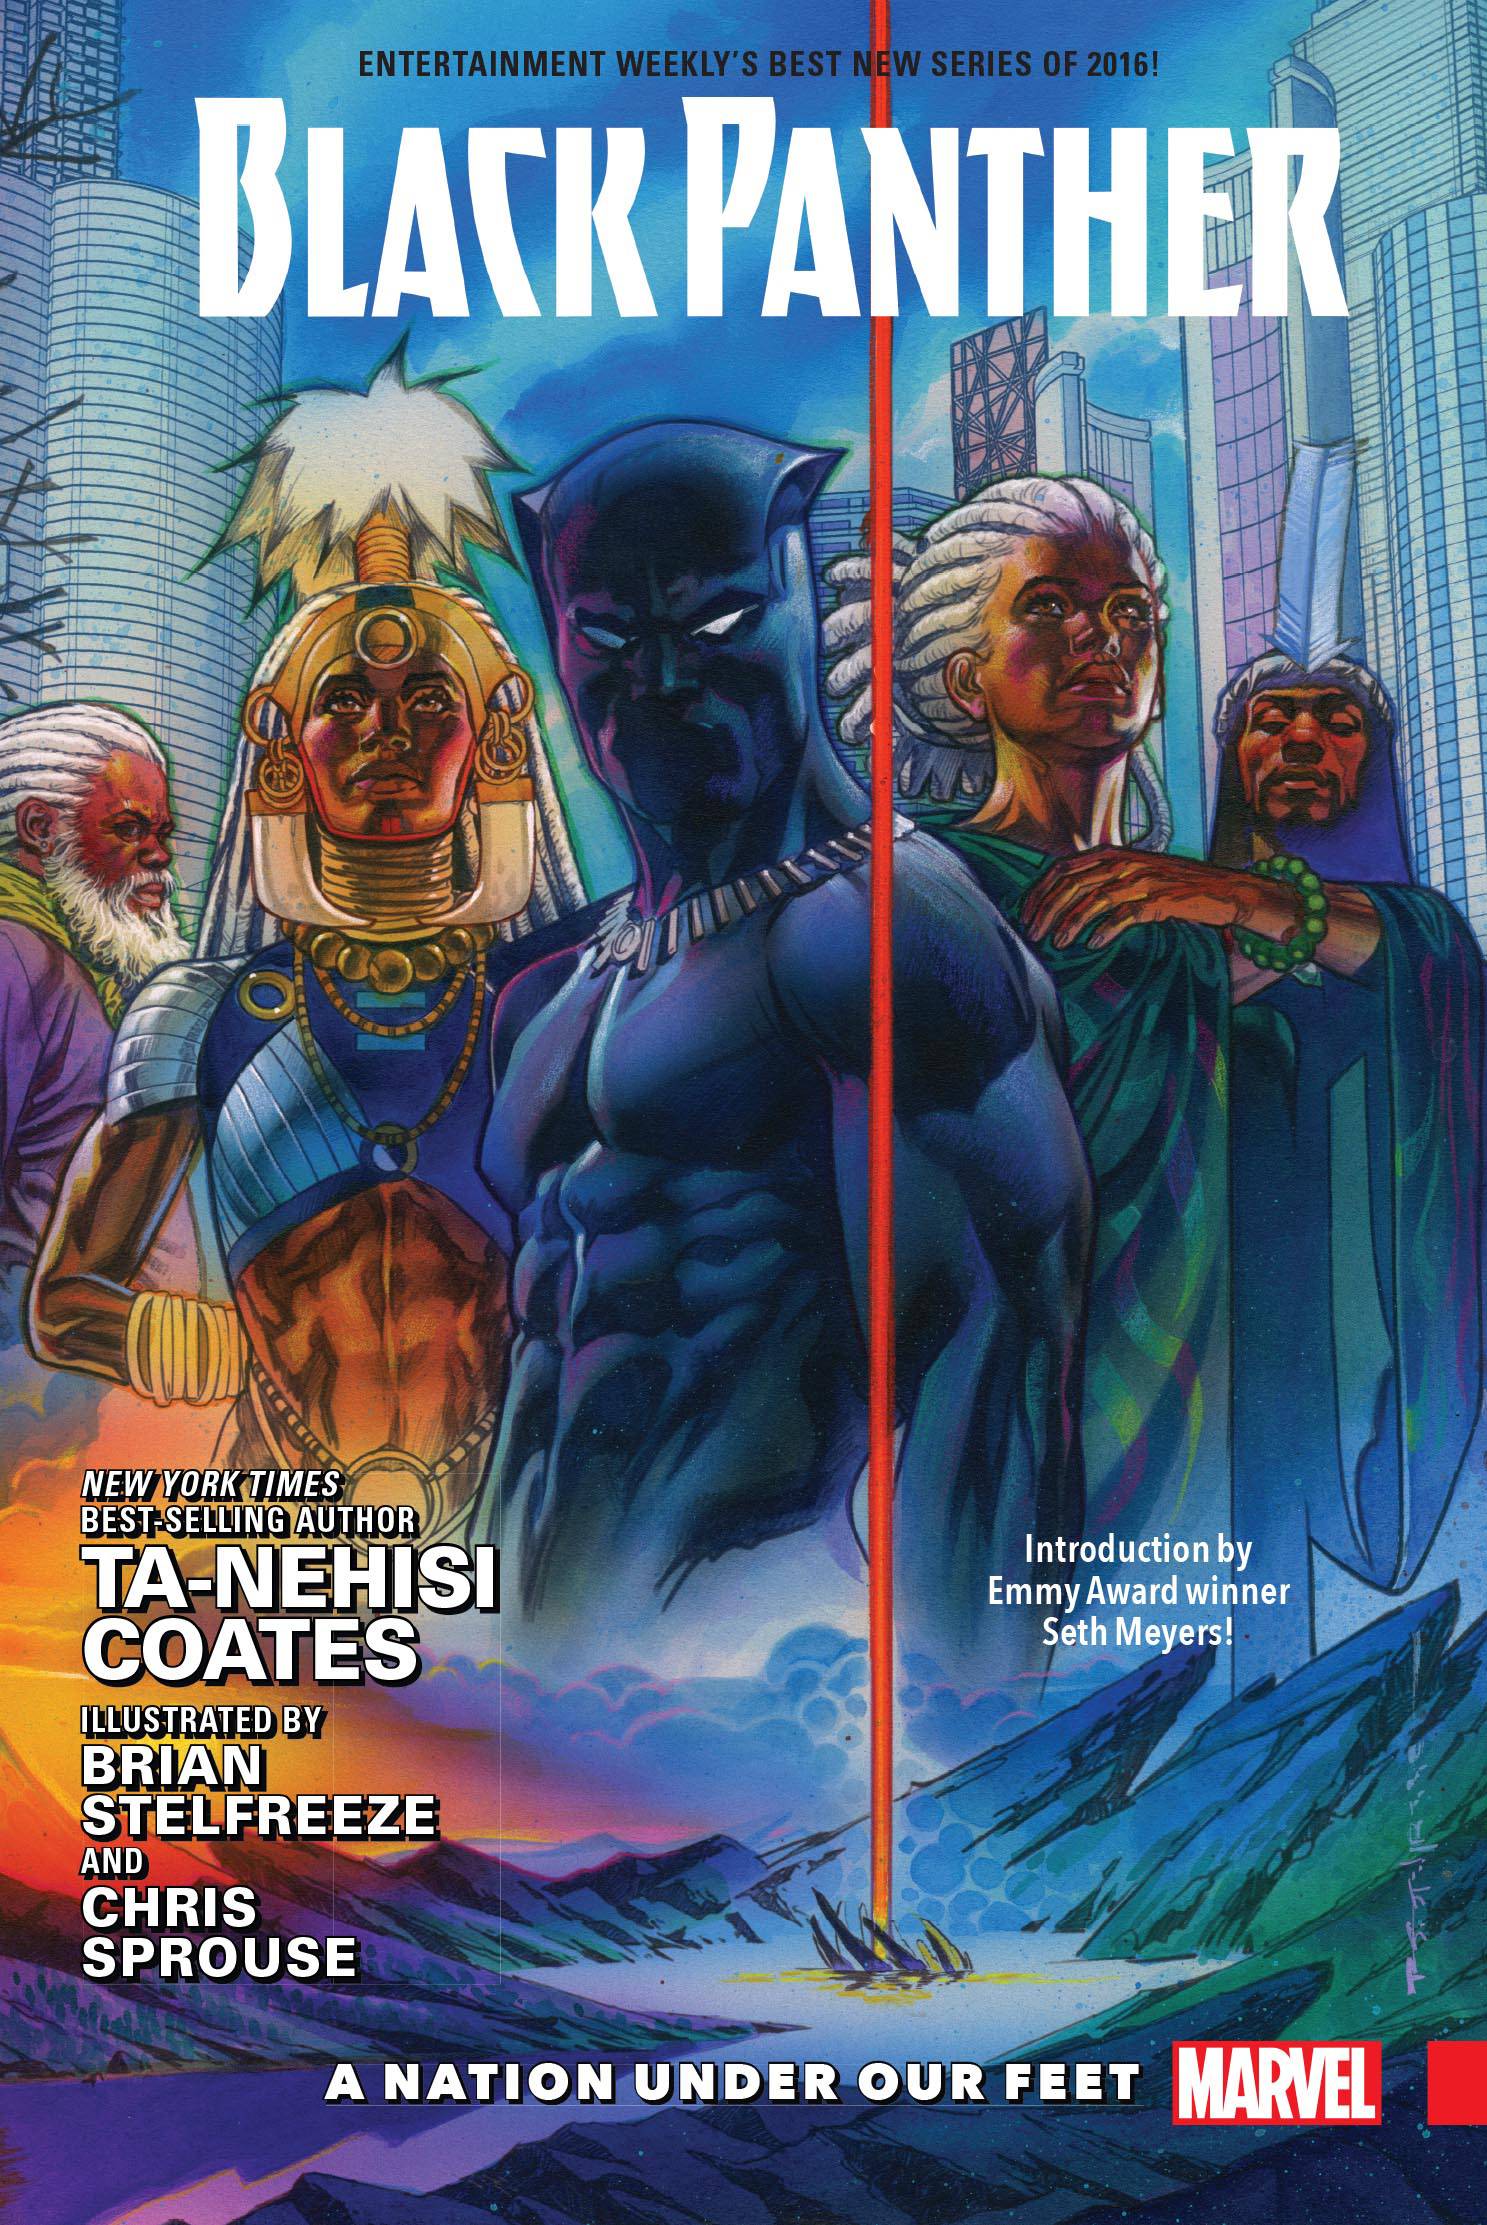 Black Panther HC Vol 1: A Nation Under Our Feet